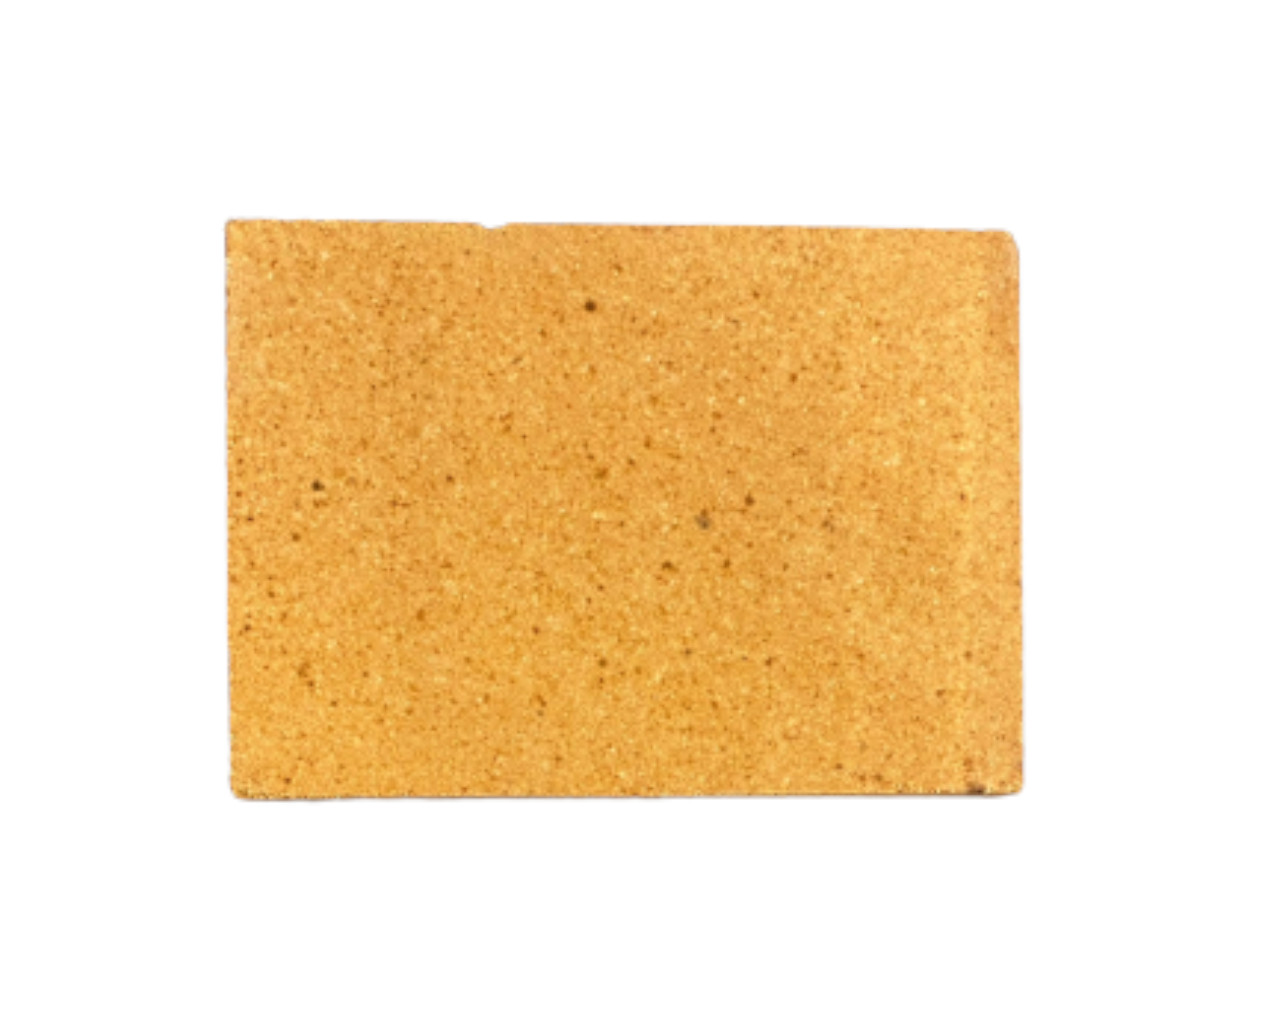 Maxiheat Fire Brick 200 x 145mm, , hi-res image number null